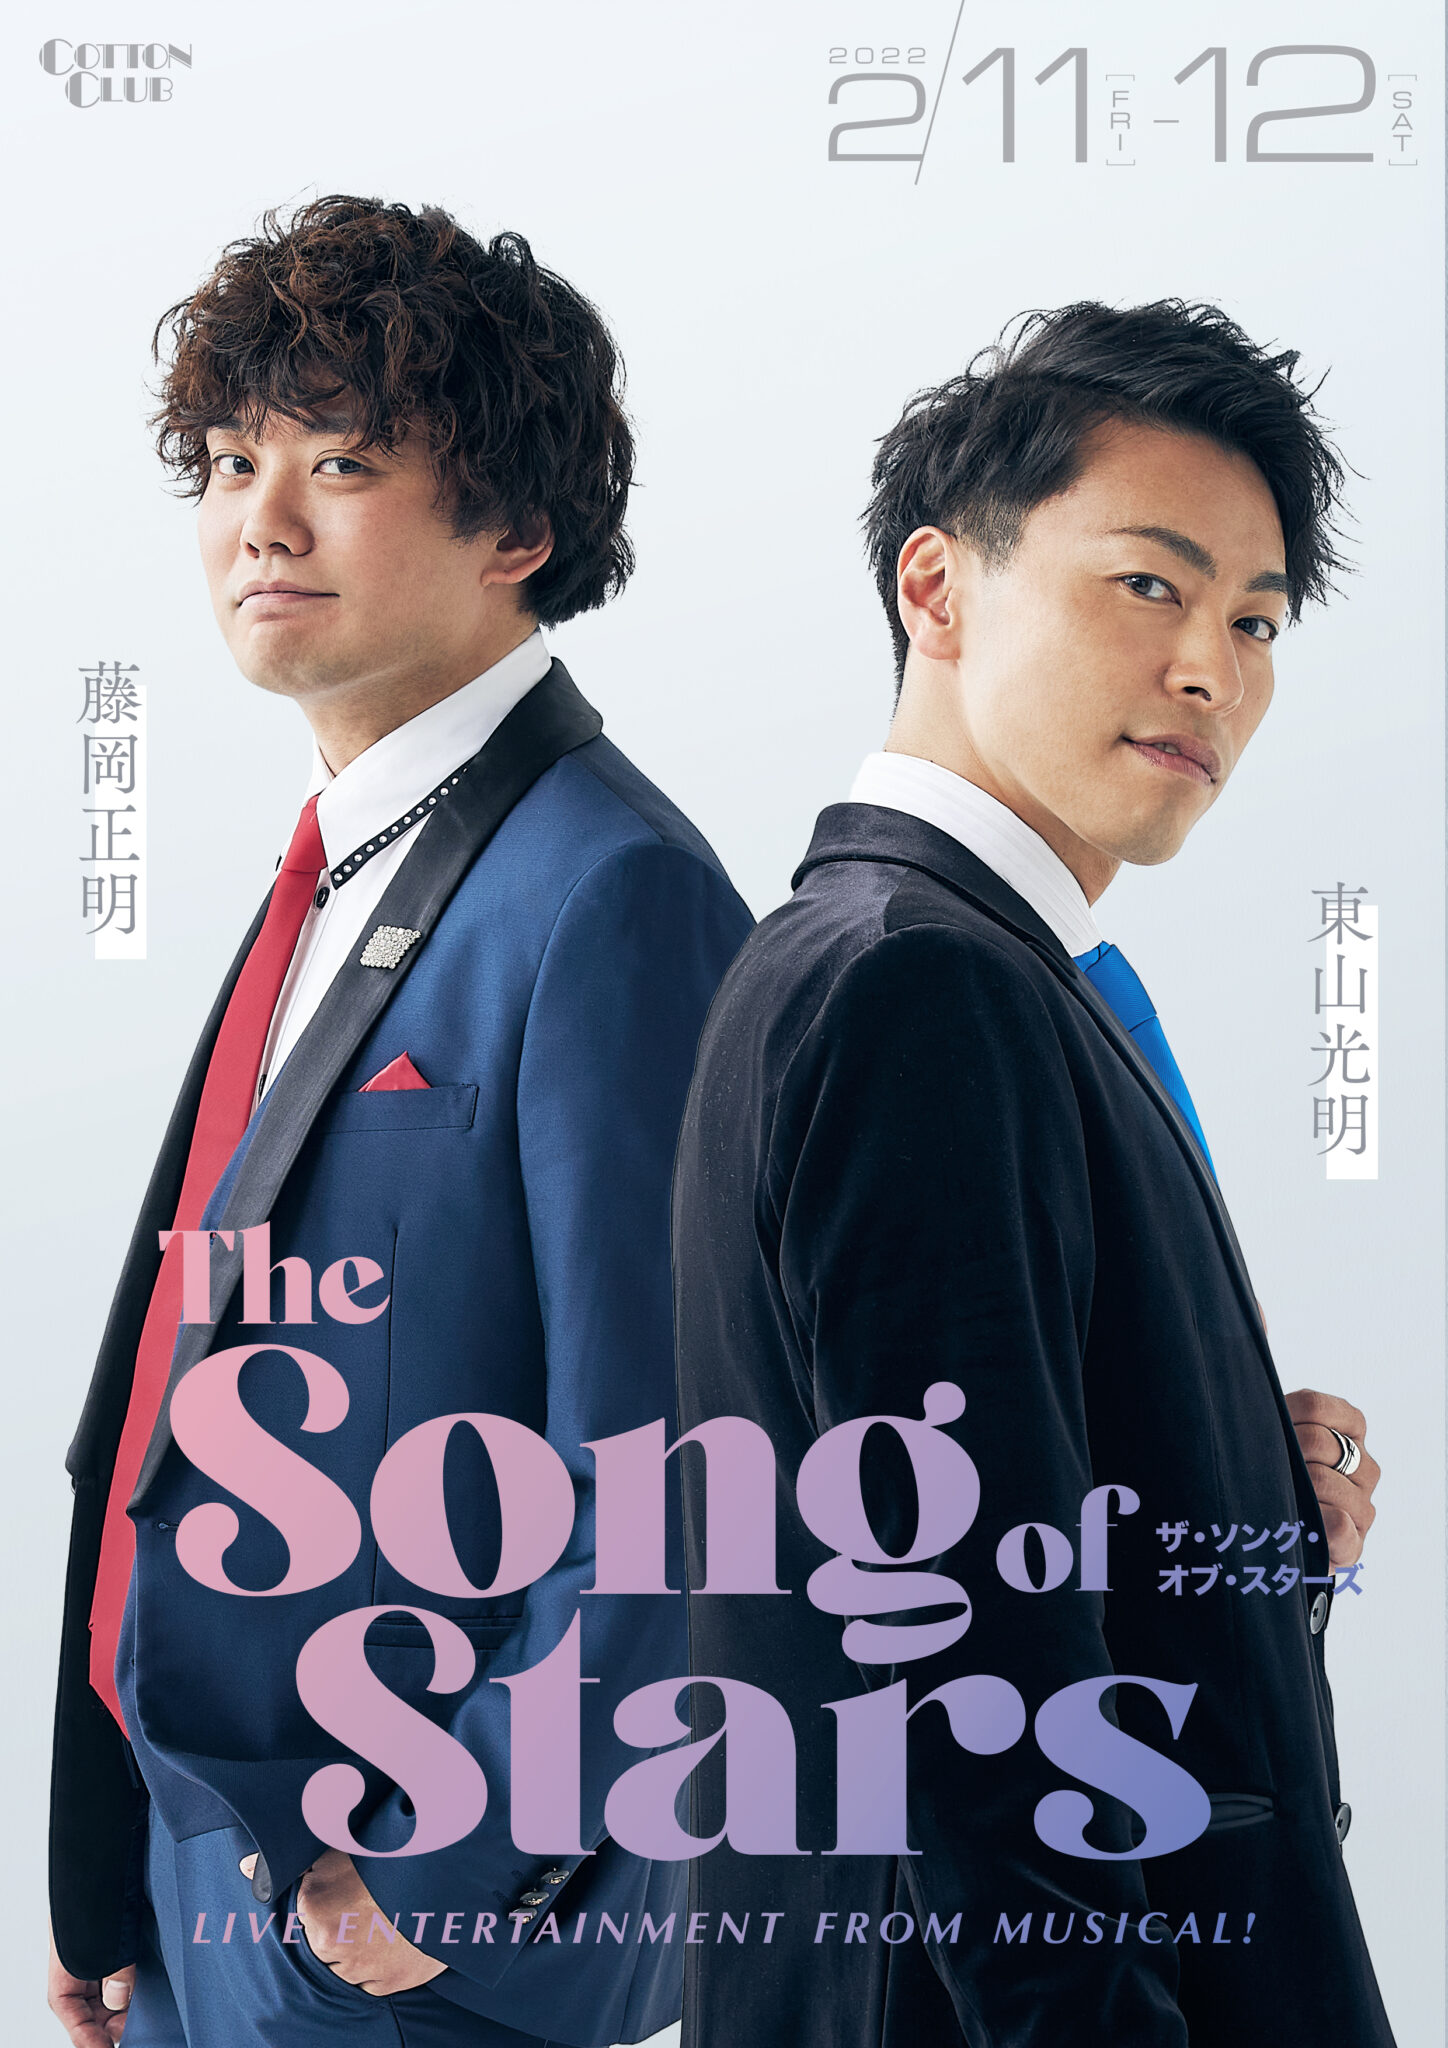 『The Song of Stars』～Live Entertainment from Musical～第二弾